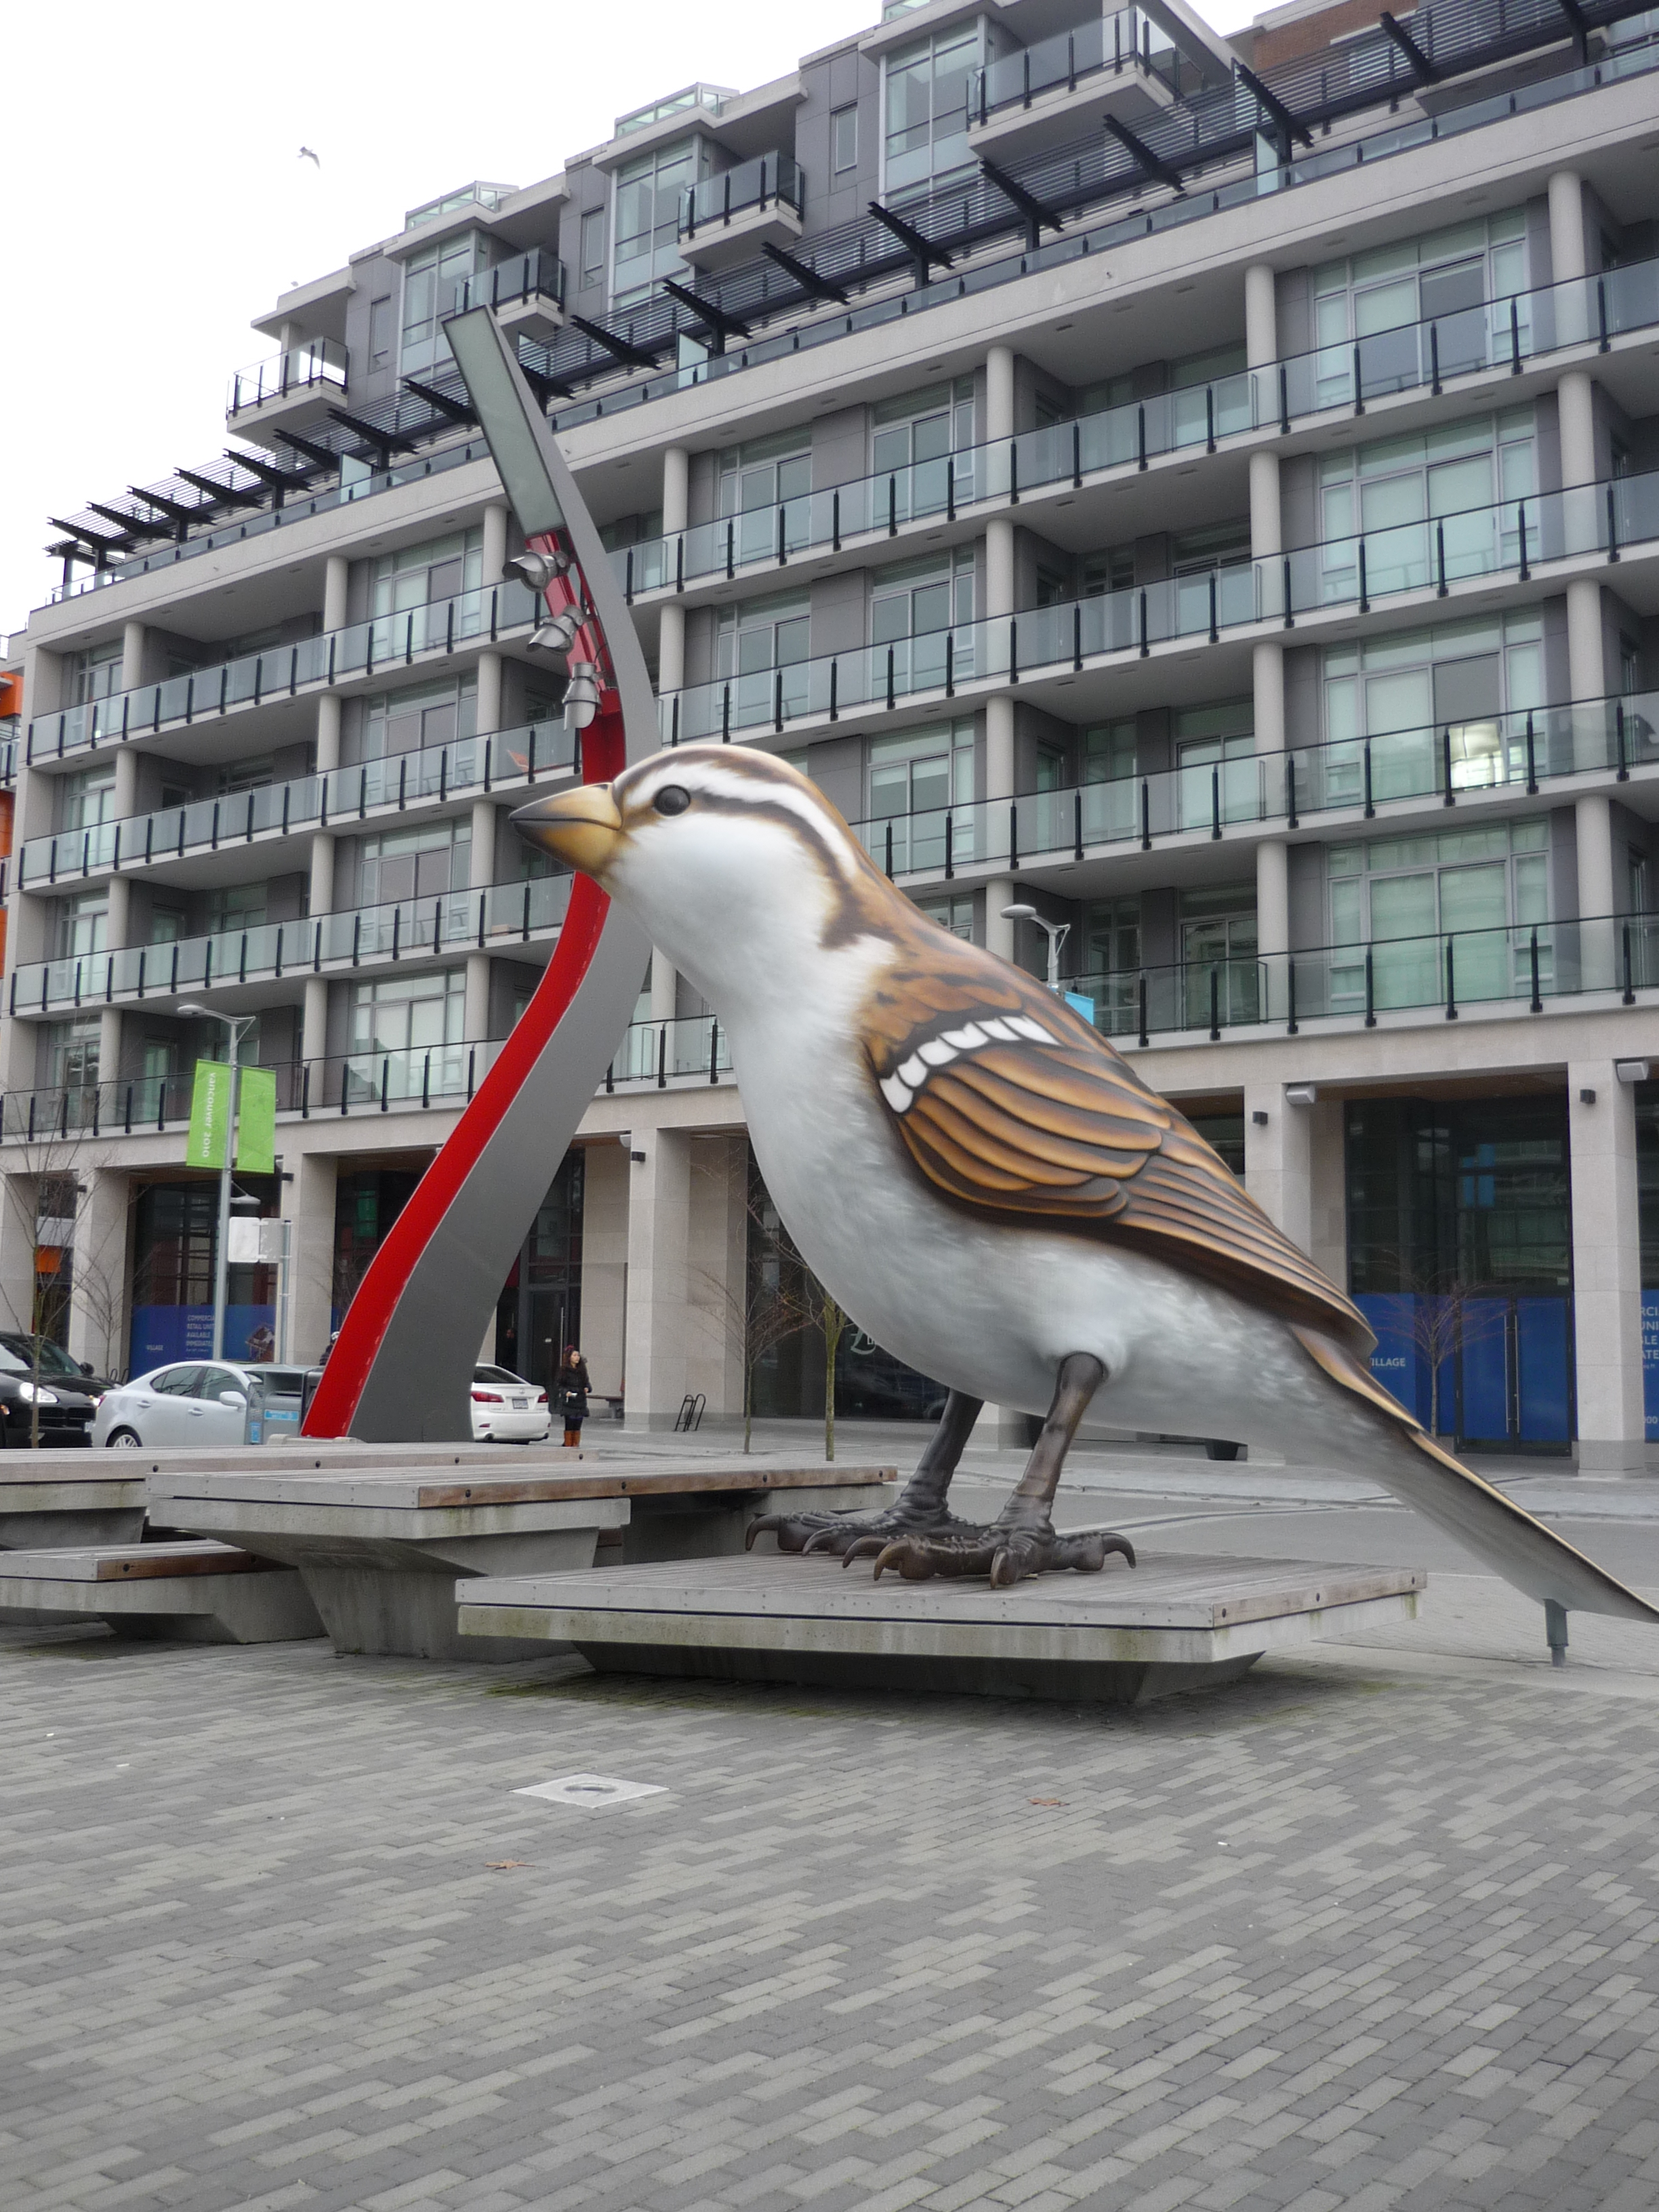 A giant statue of a sparrow stands outside a condo building.